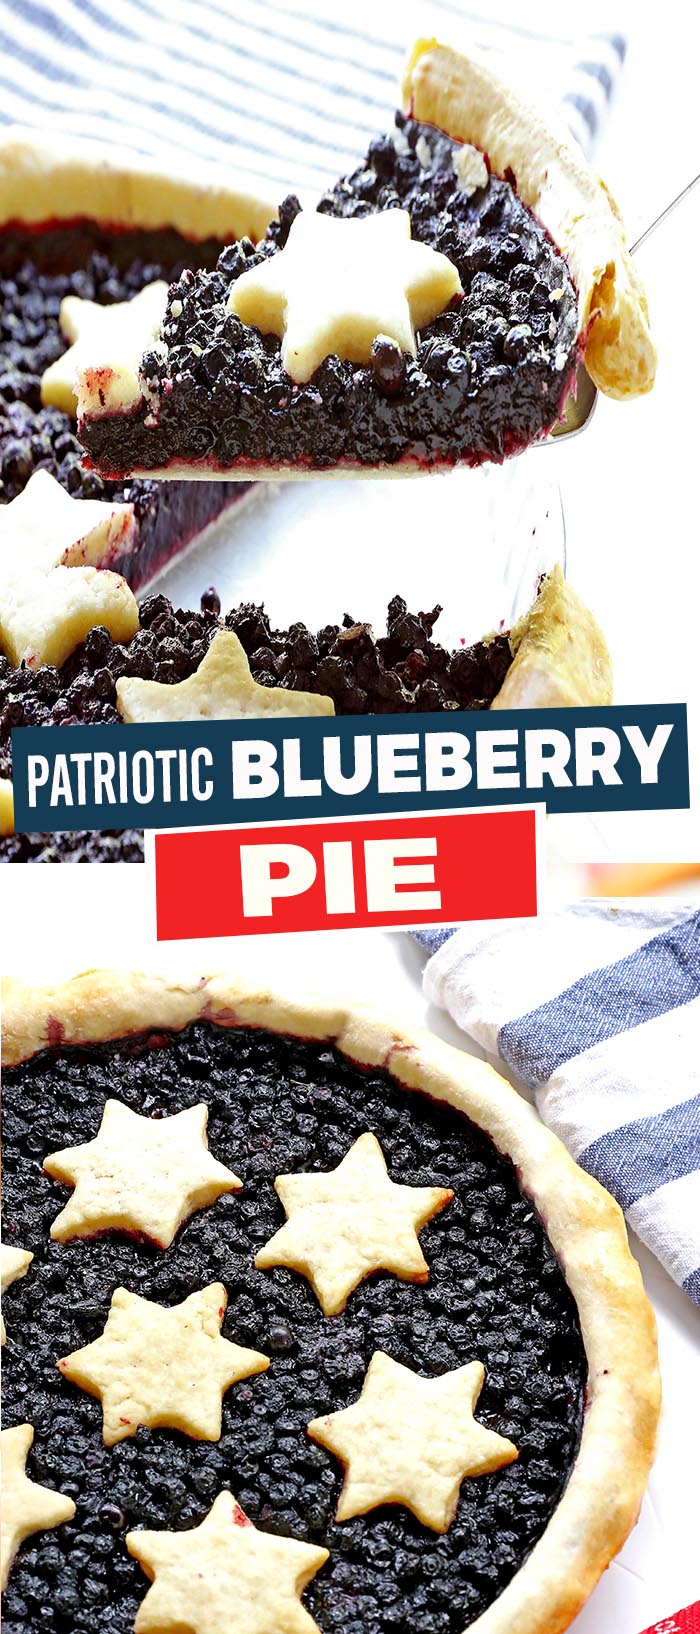 Simple, classic blueberry pie! With a homemade crust and patriotic decorations. Perfect for the summer season, or any of your fun patriotic parties and activities.